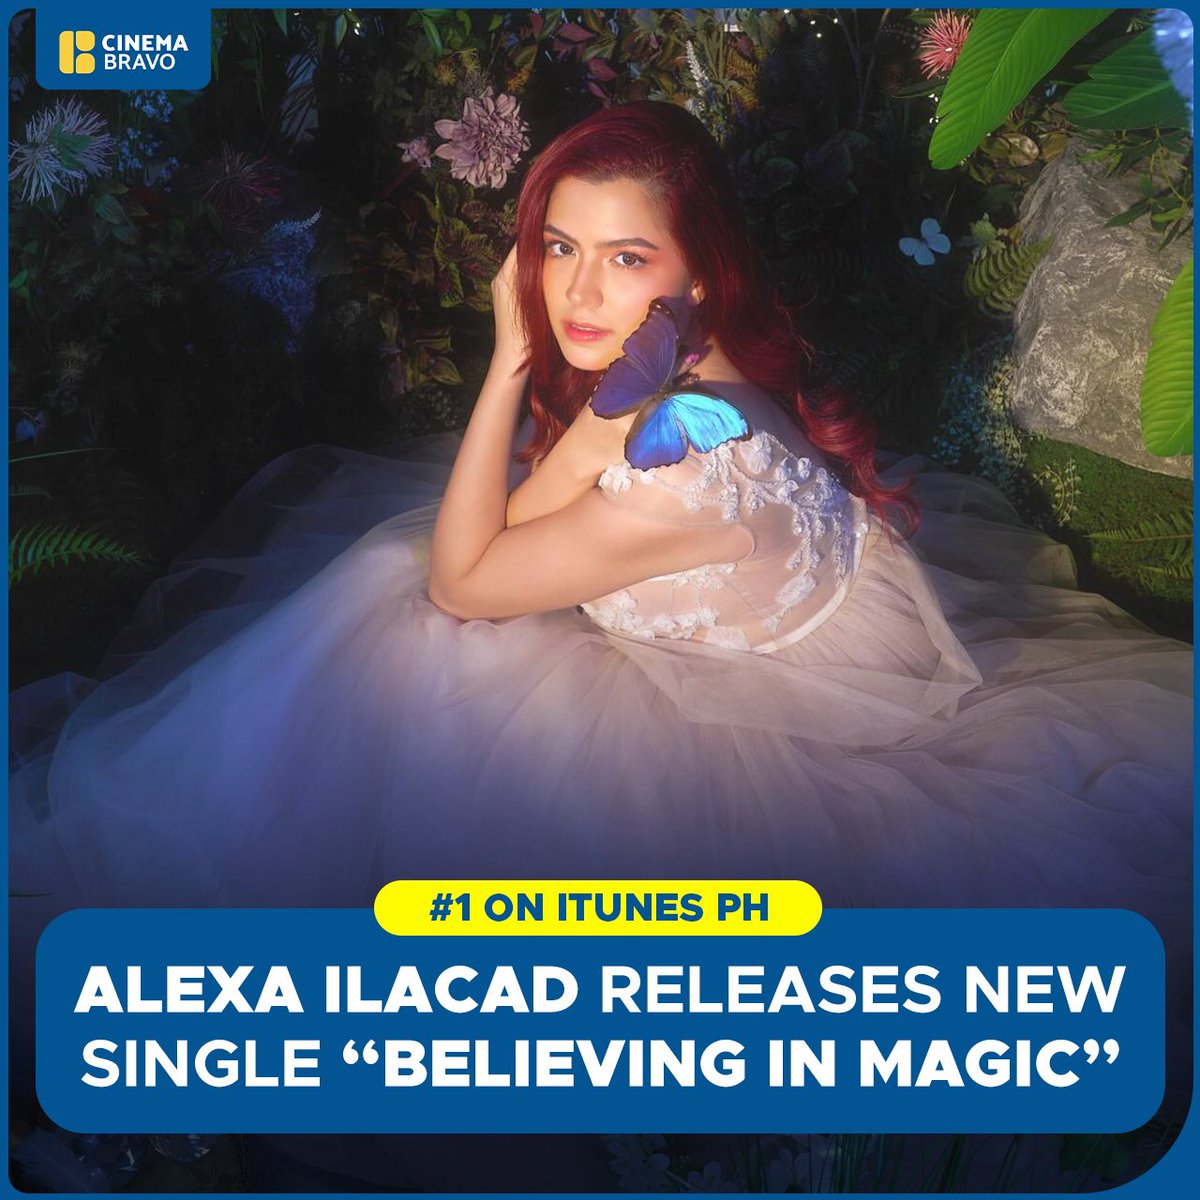 UPDATE: #AlexaIlacad's solo version of 'Believing in Magic' is currently #1 on iTunes PH on its debut today on various music streaming platforms. Congratulations for yet another milestone in your magical career, @alexailacad! Photo by cielostudio_mnl